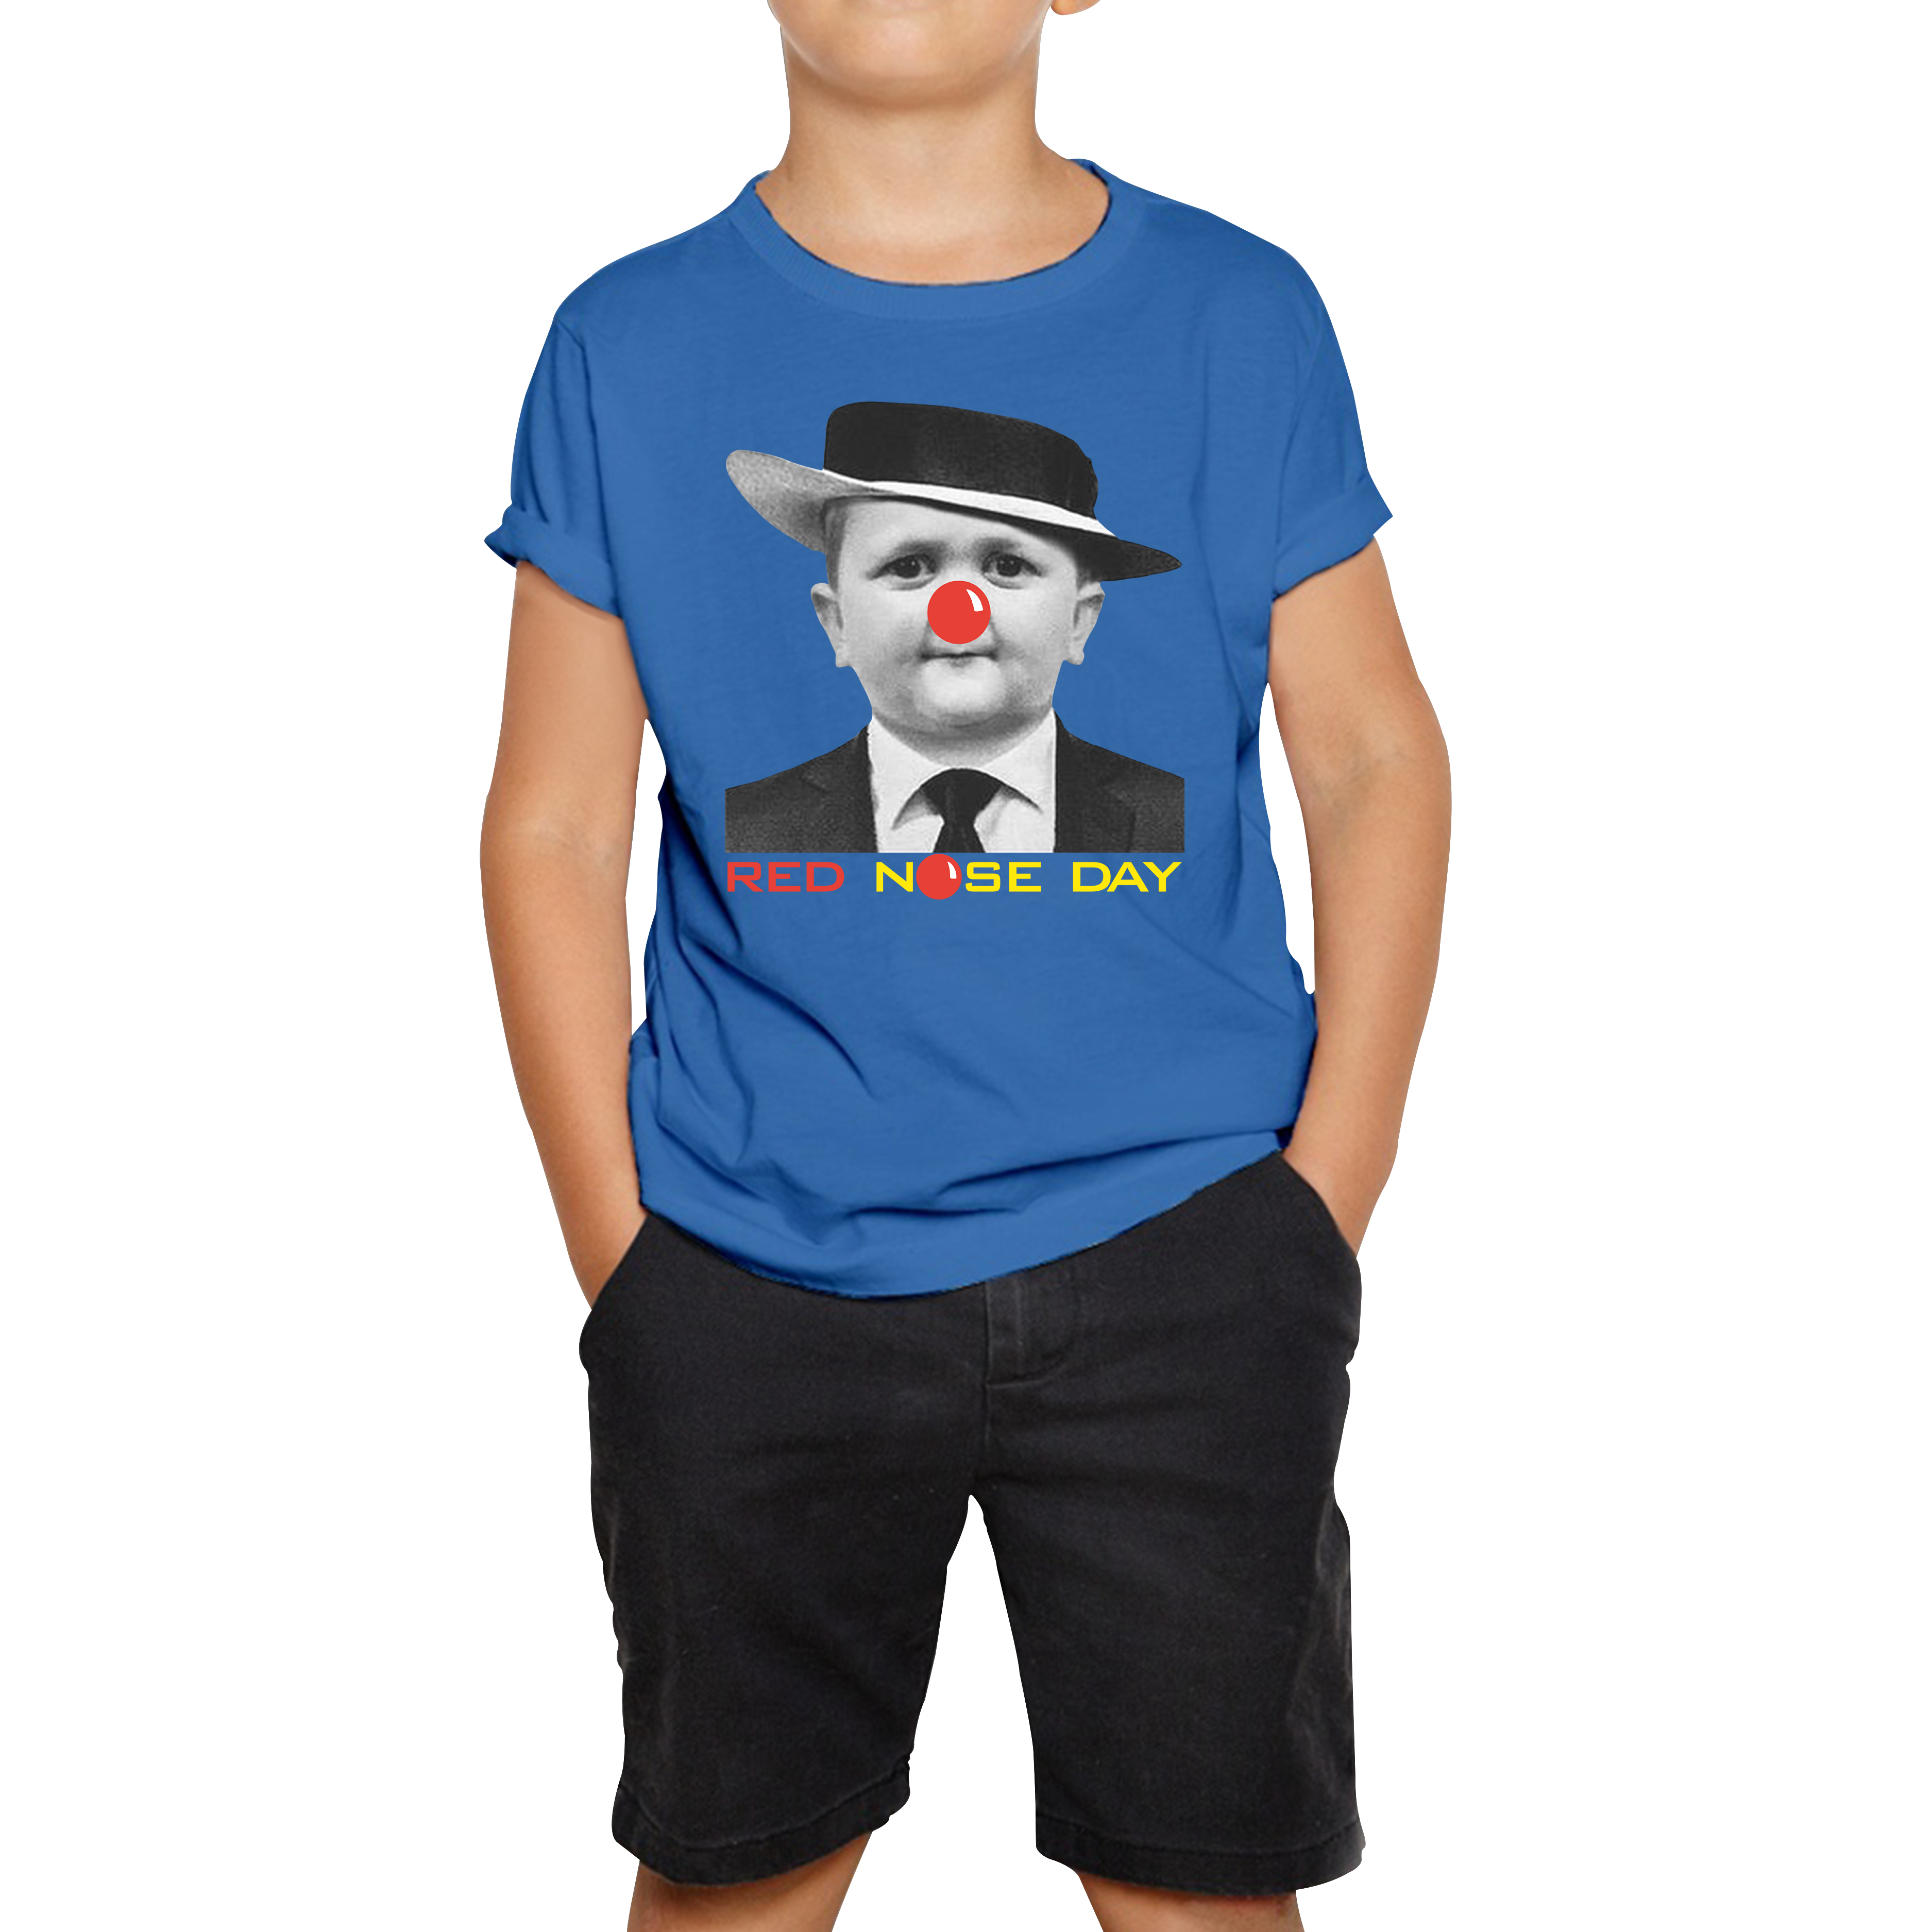 Hasbulla Magomedov MMA Fighter Red Nose Day Kids T Shirt. 50% Goes To Charity